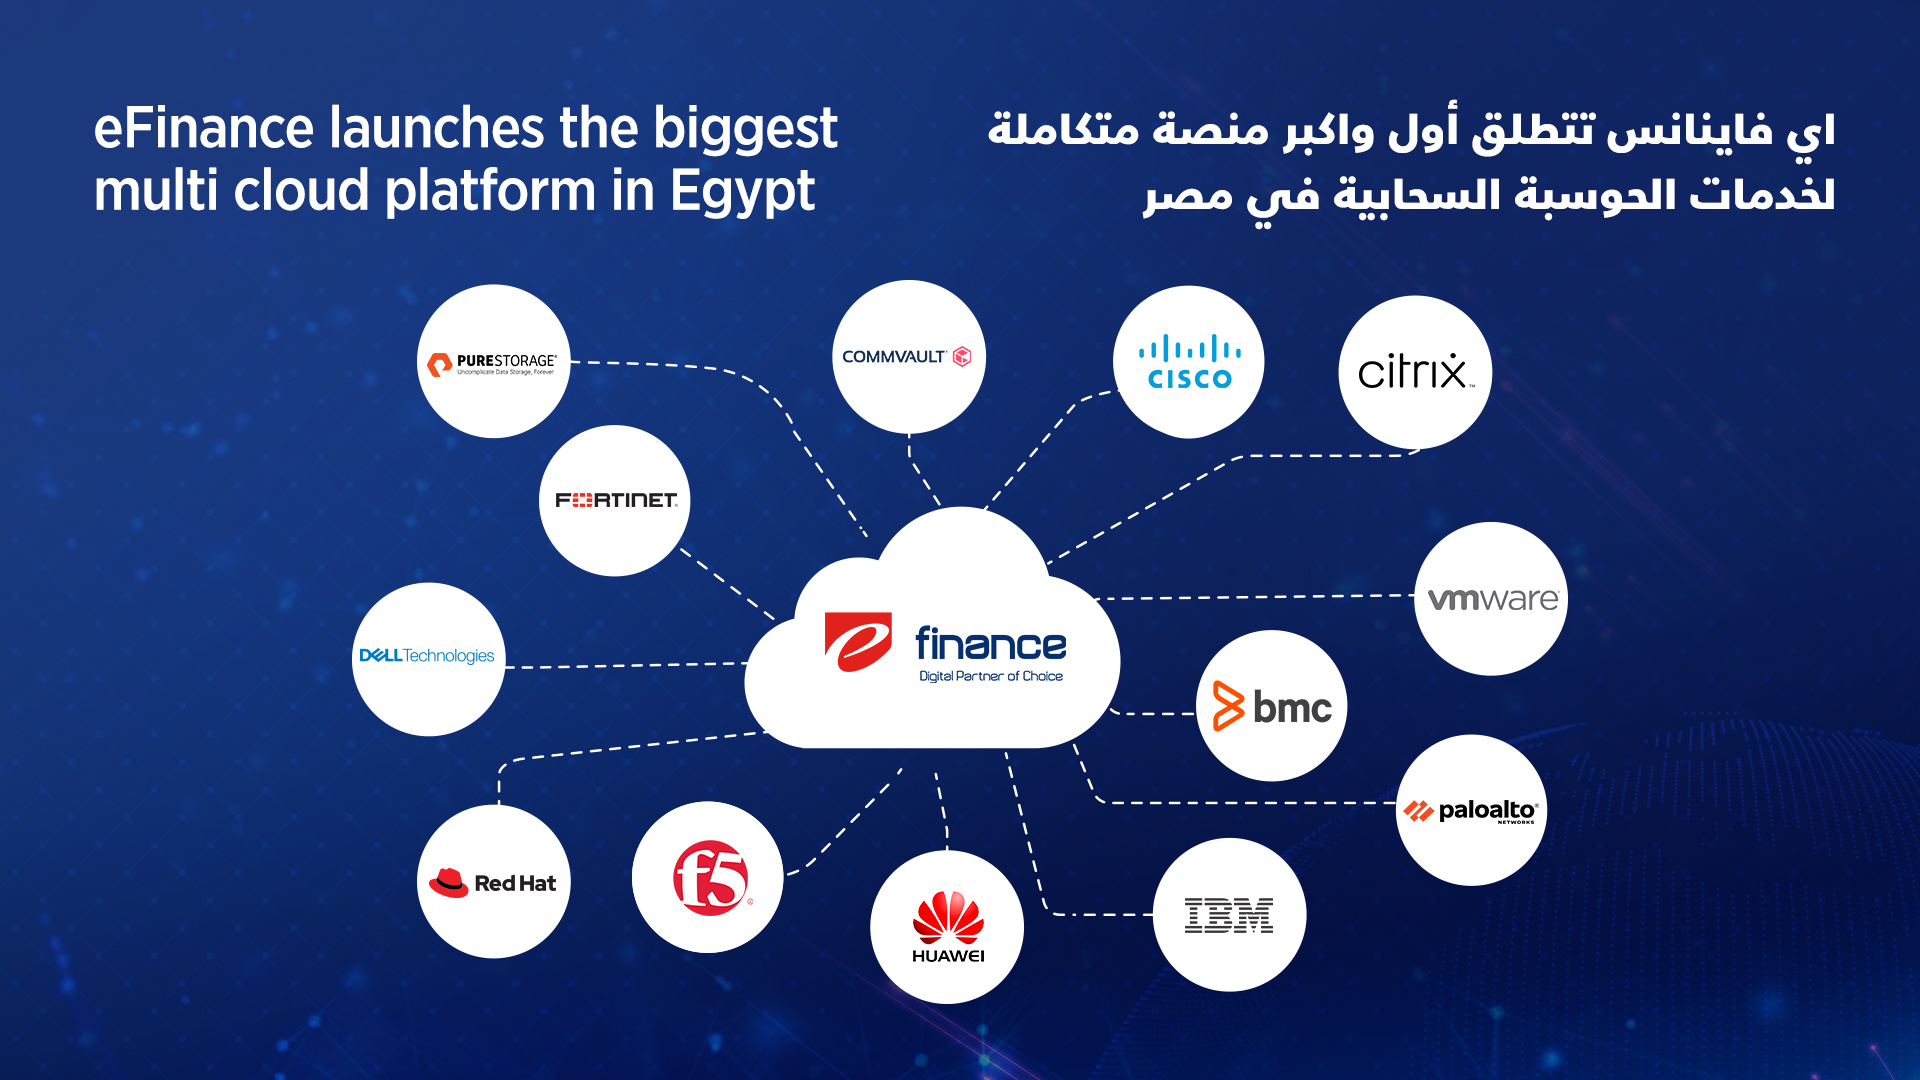 eFinance launches the biggest multi cloud platform in Egypt